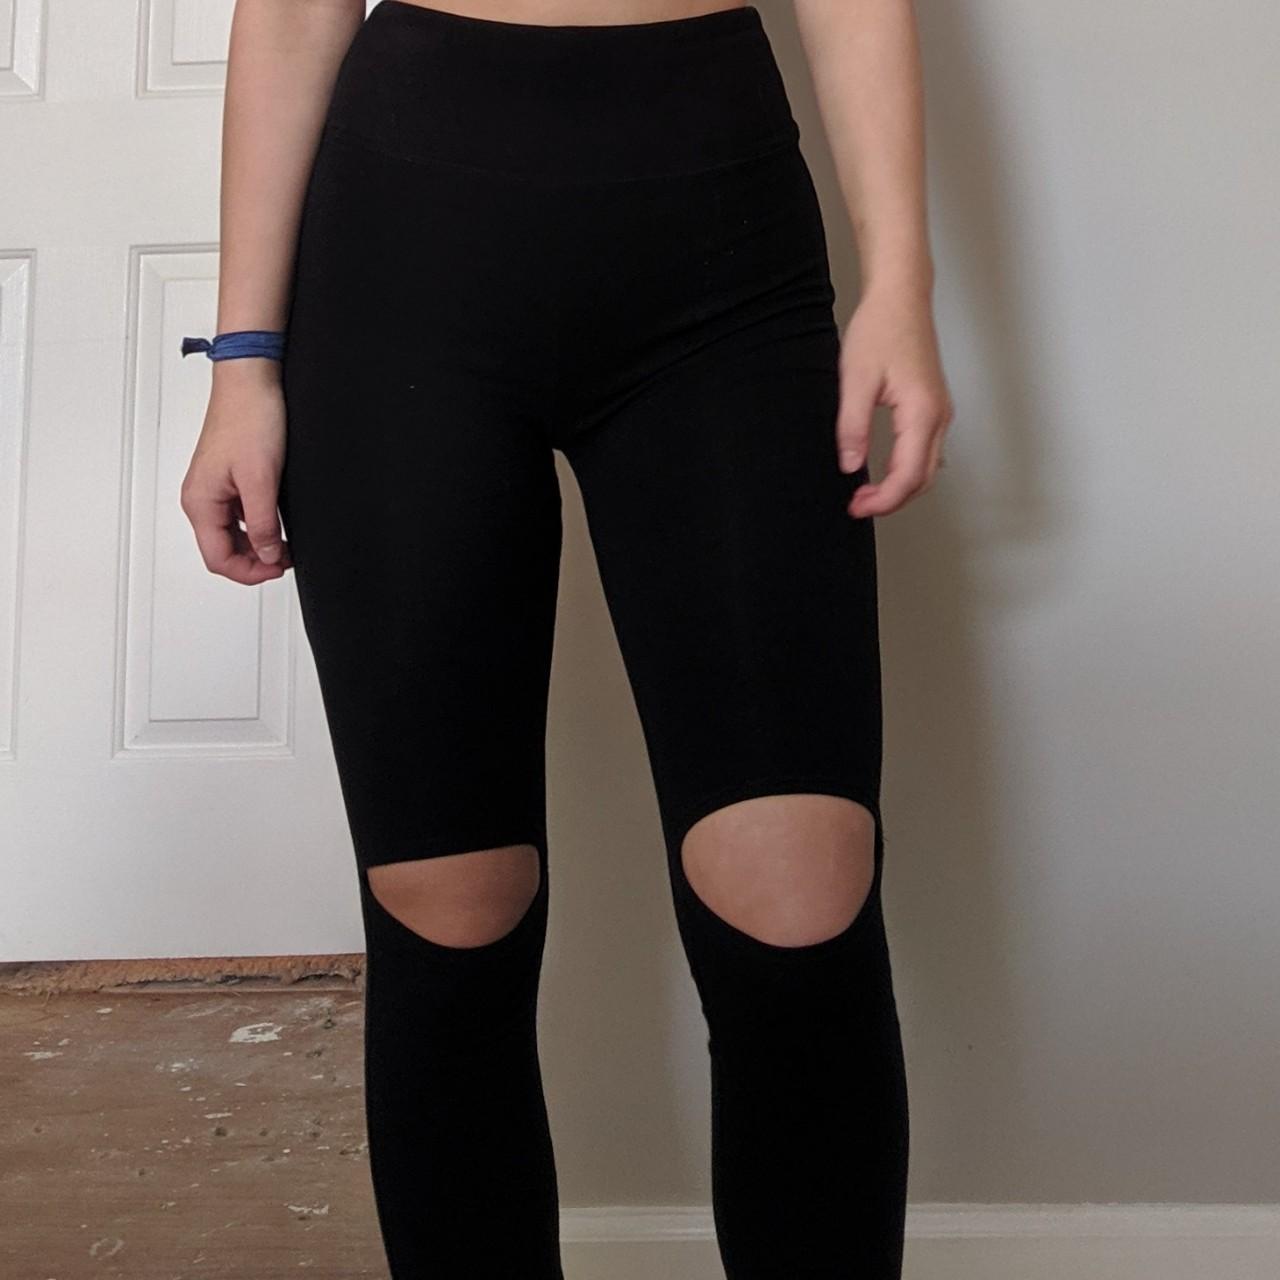 Black long leggings with holes in the knees. They